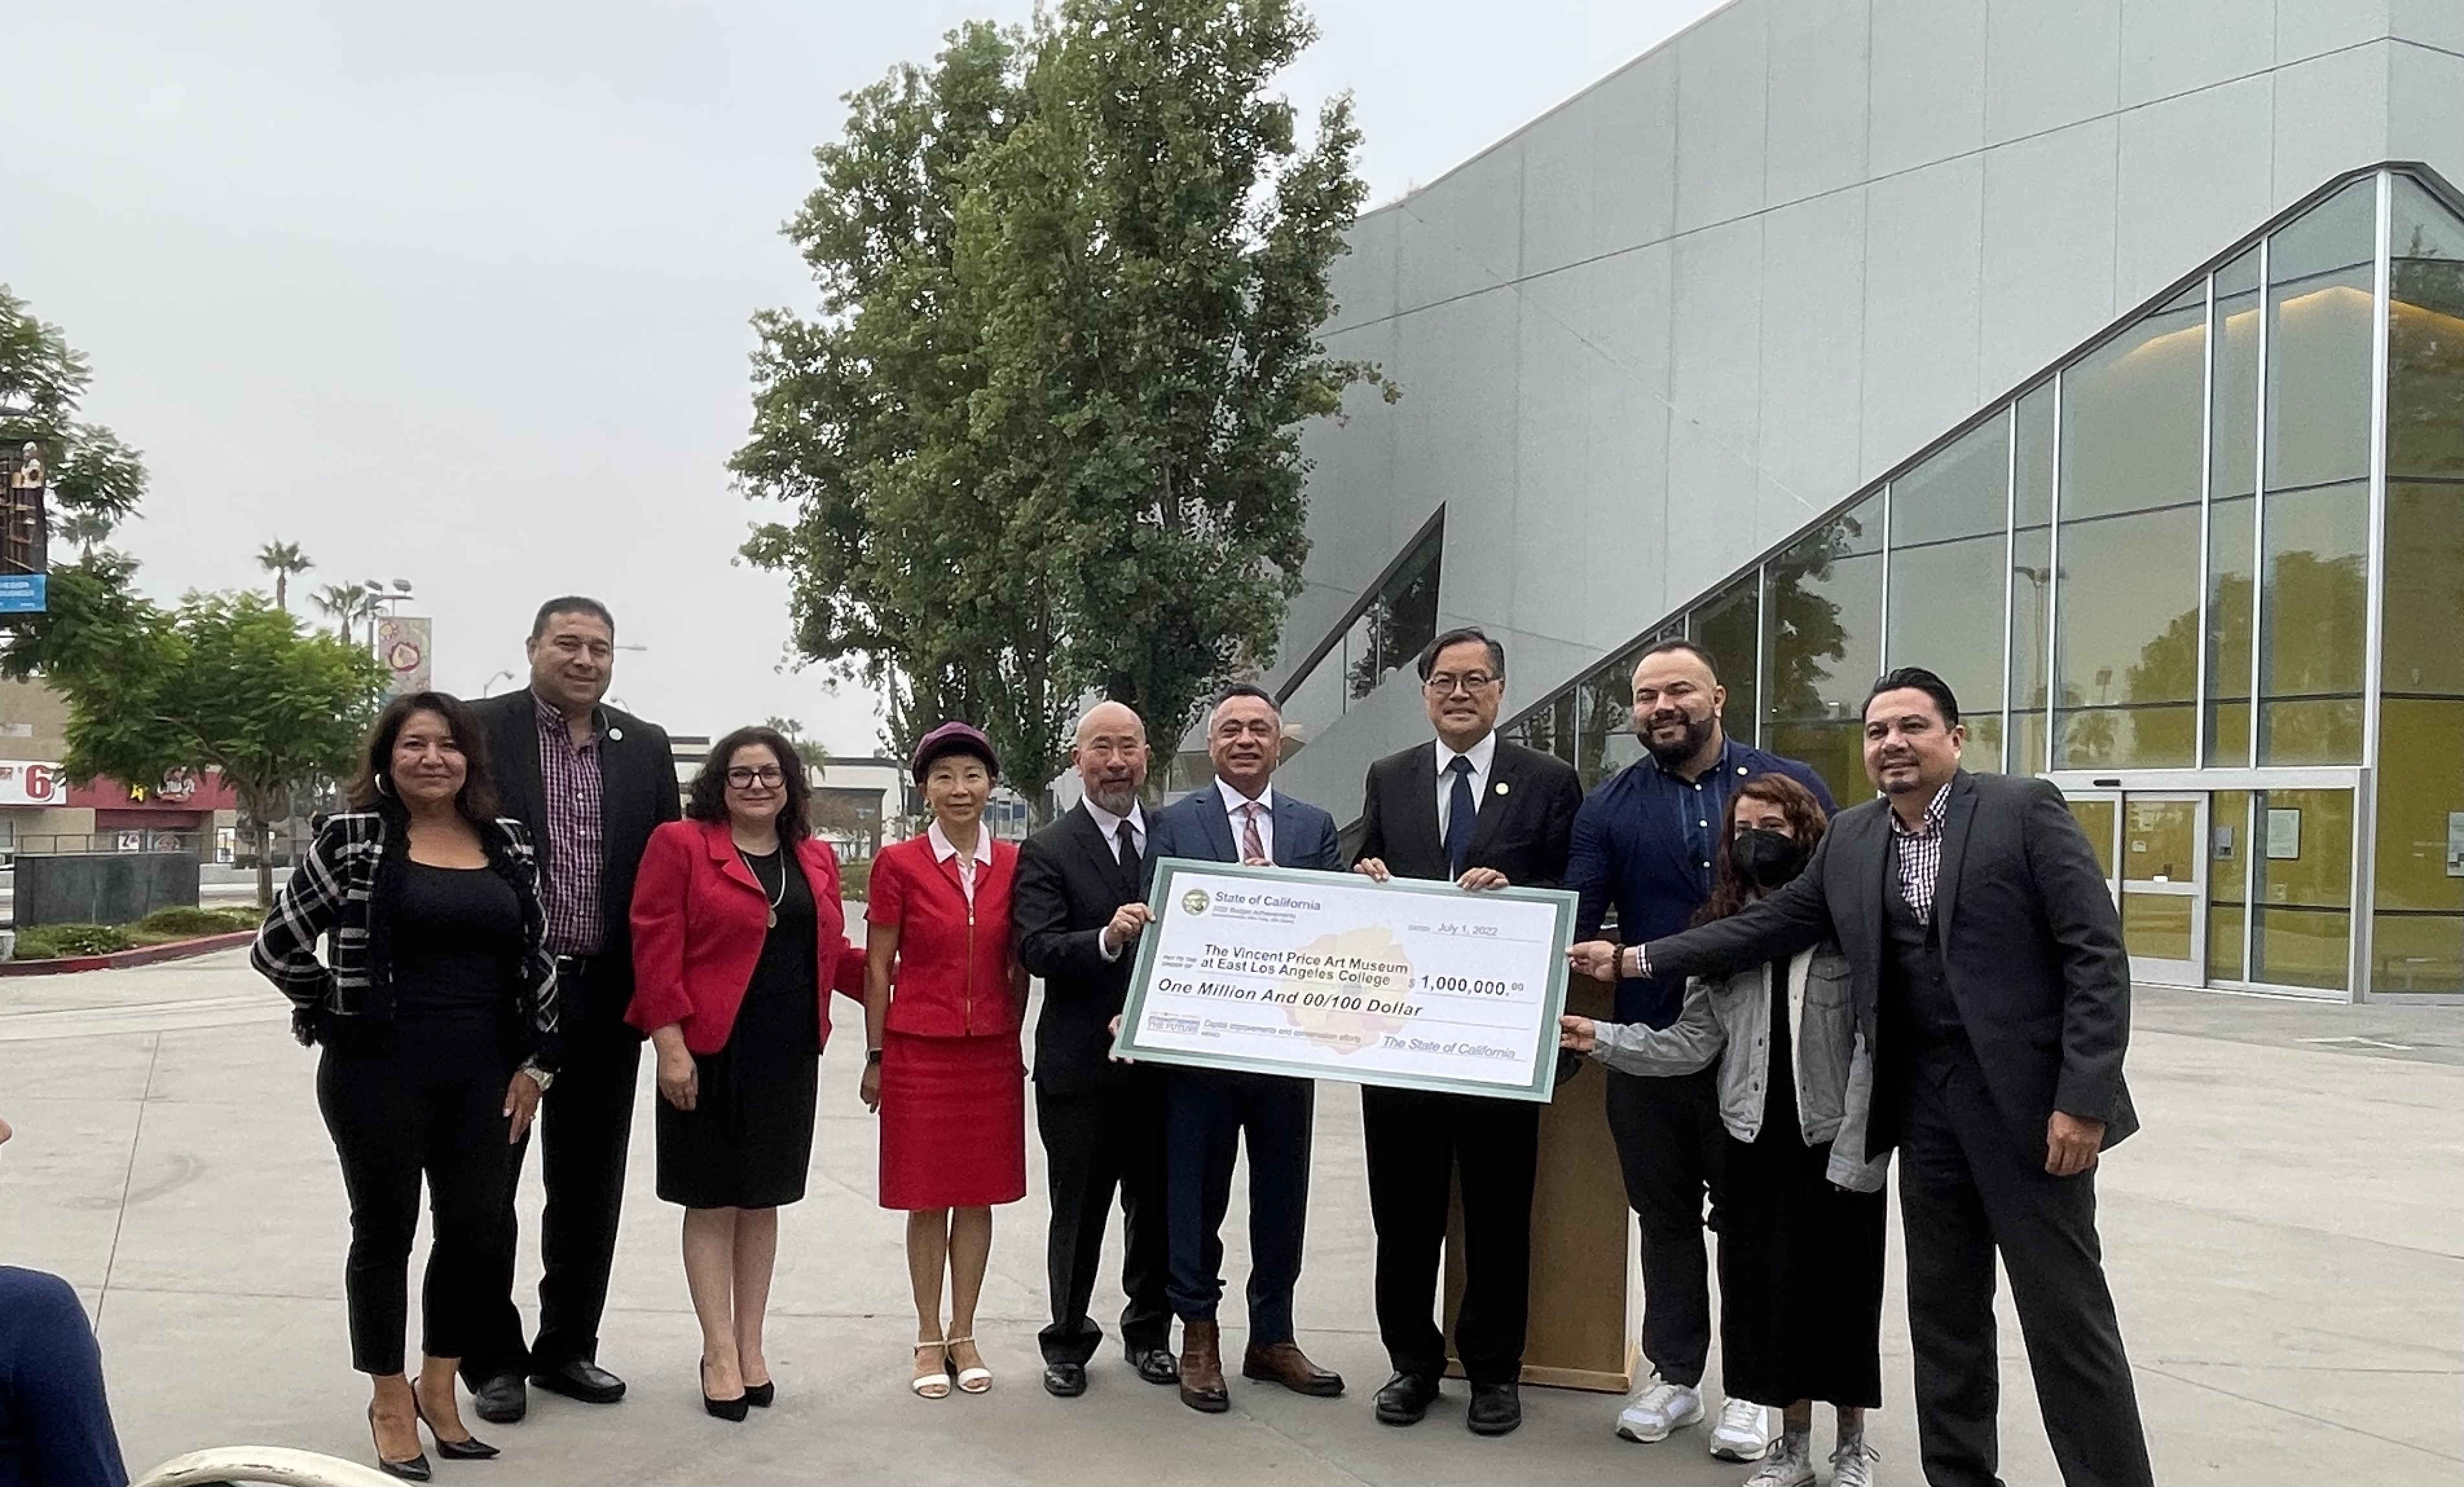 Assemblymember Fong presenting a check to the Vincent Price Art Museum